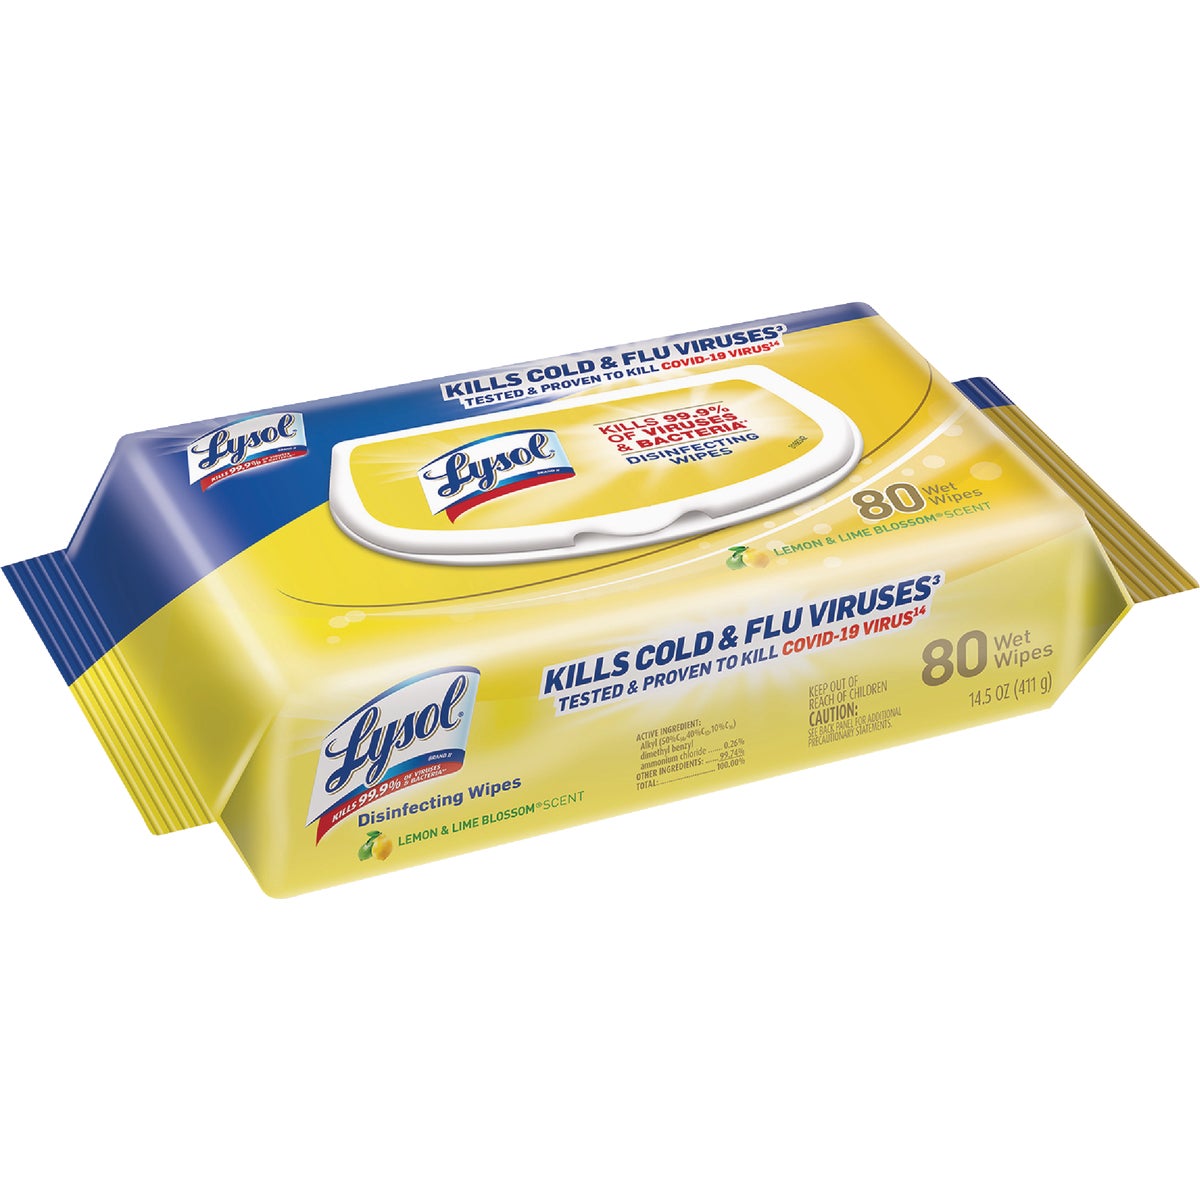 Lysol Lemon & Lime Blossom Disinfecting Wipes Flatpack (80-Count)